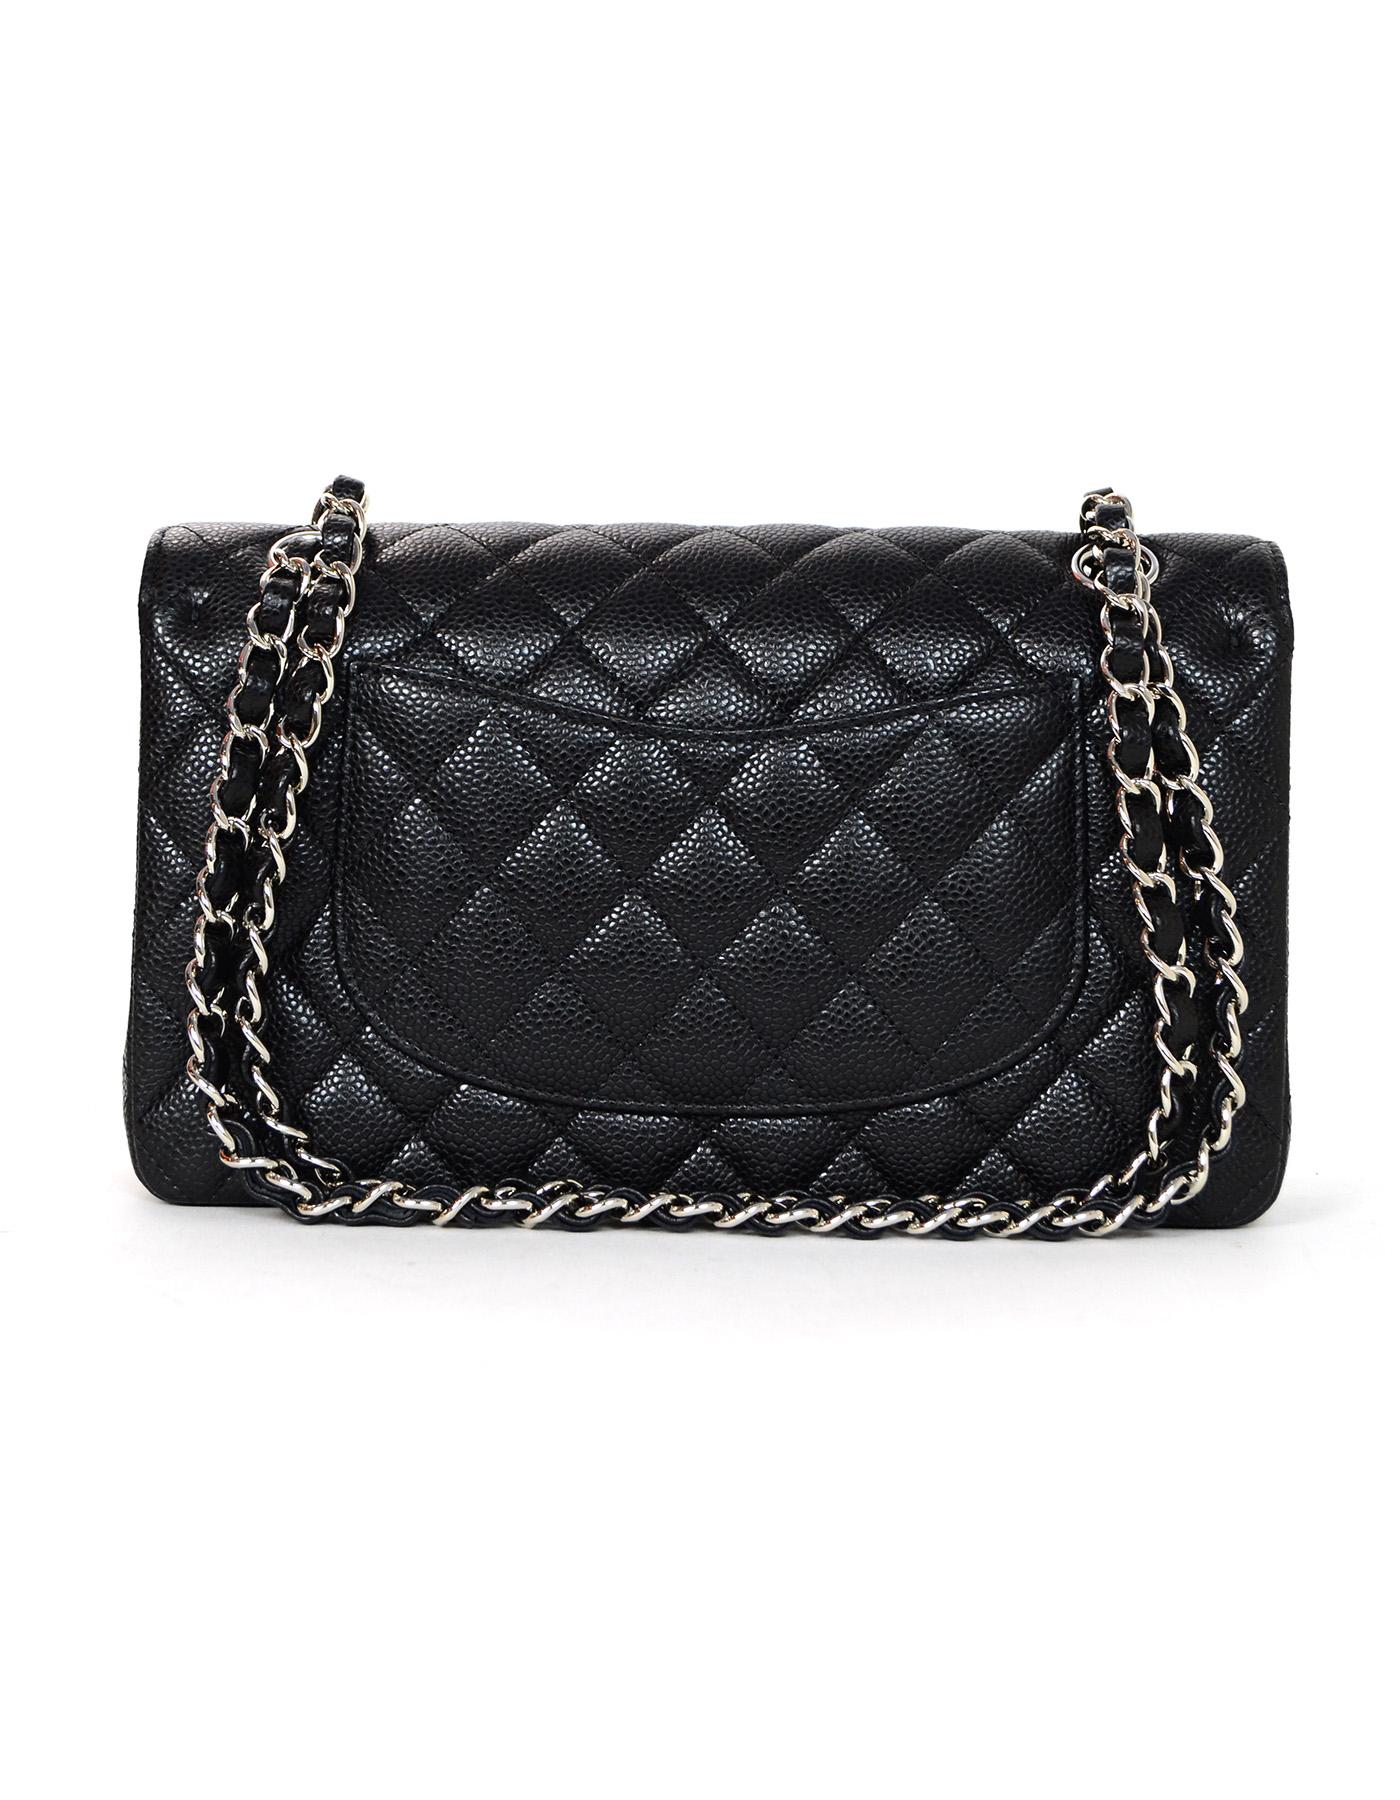 Chanel 2018 NEW Black Quilted Caviar Leather Medium 10